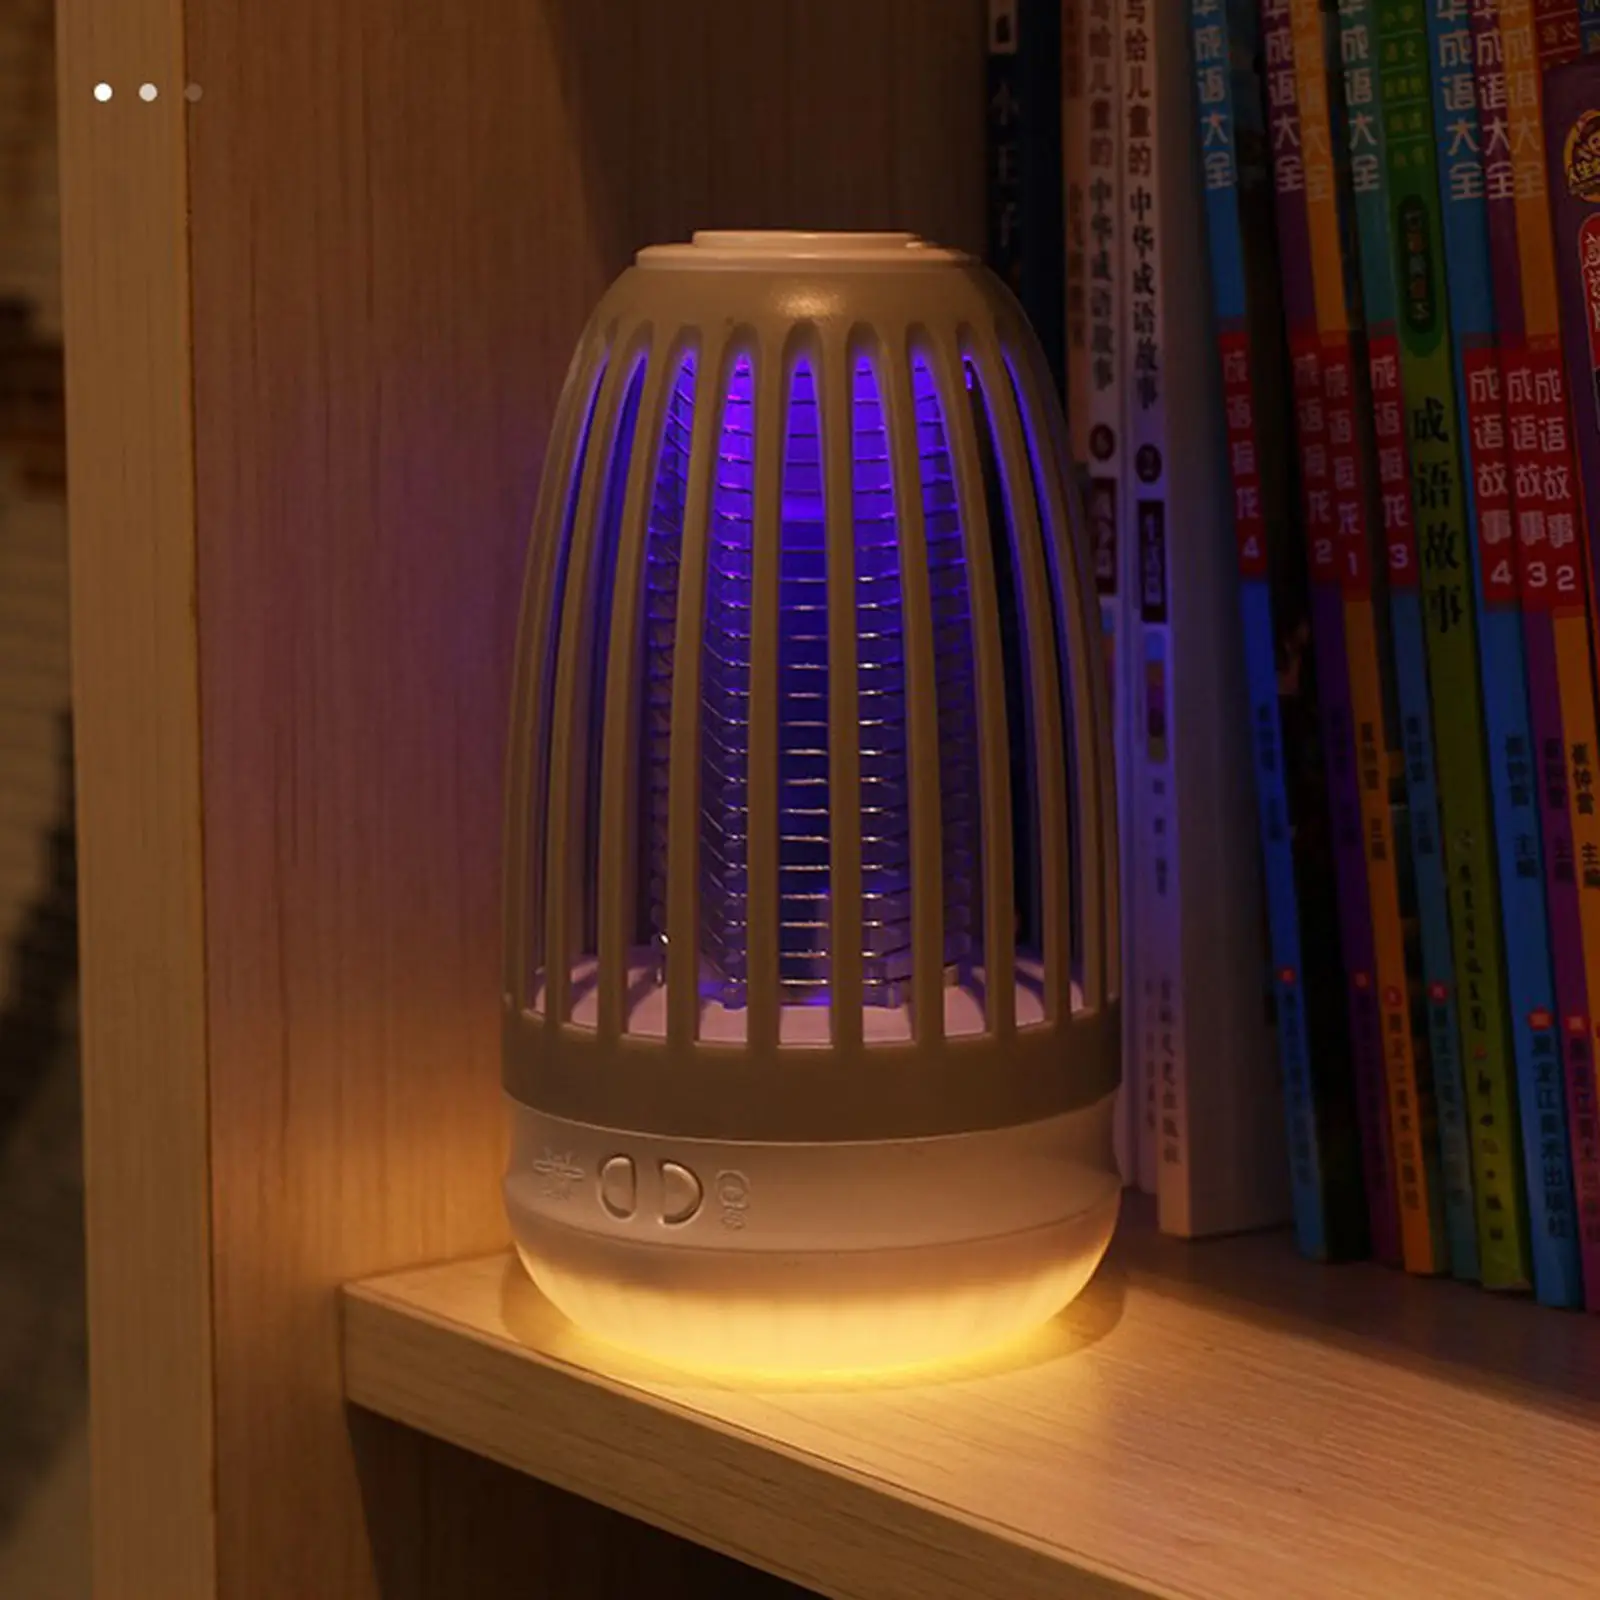 Portable Mosquitoes Killer Lamp, Household Insect Killer with Protect Housing, Outdoor Indoor Mosquitoes Killing Lamp Trap